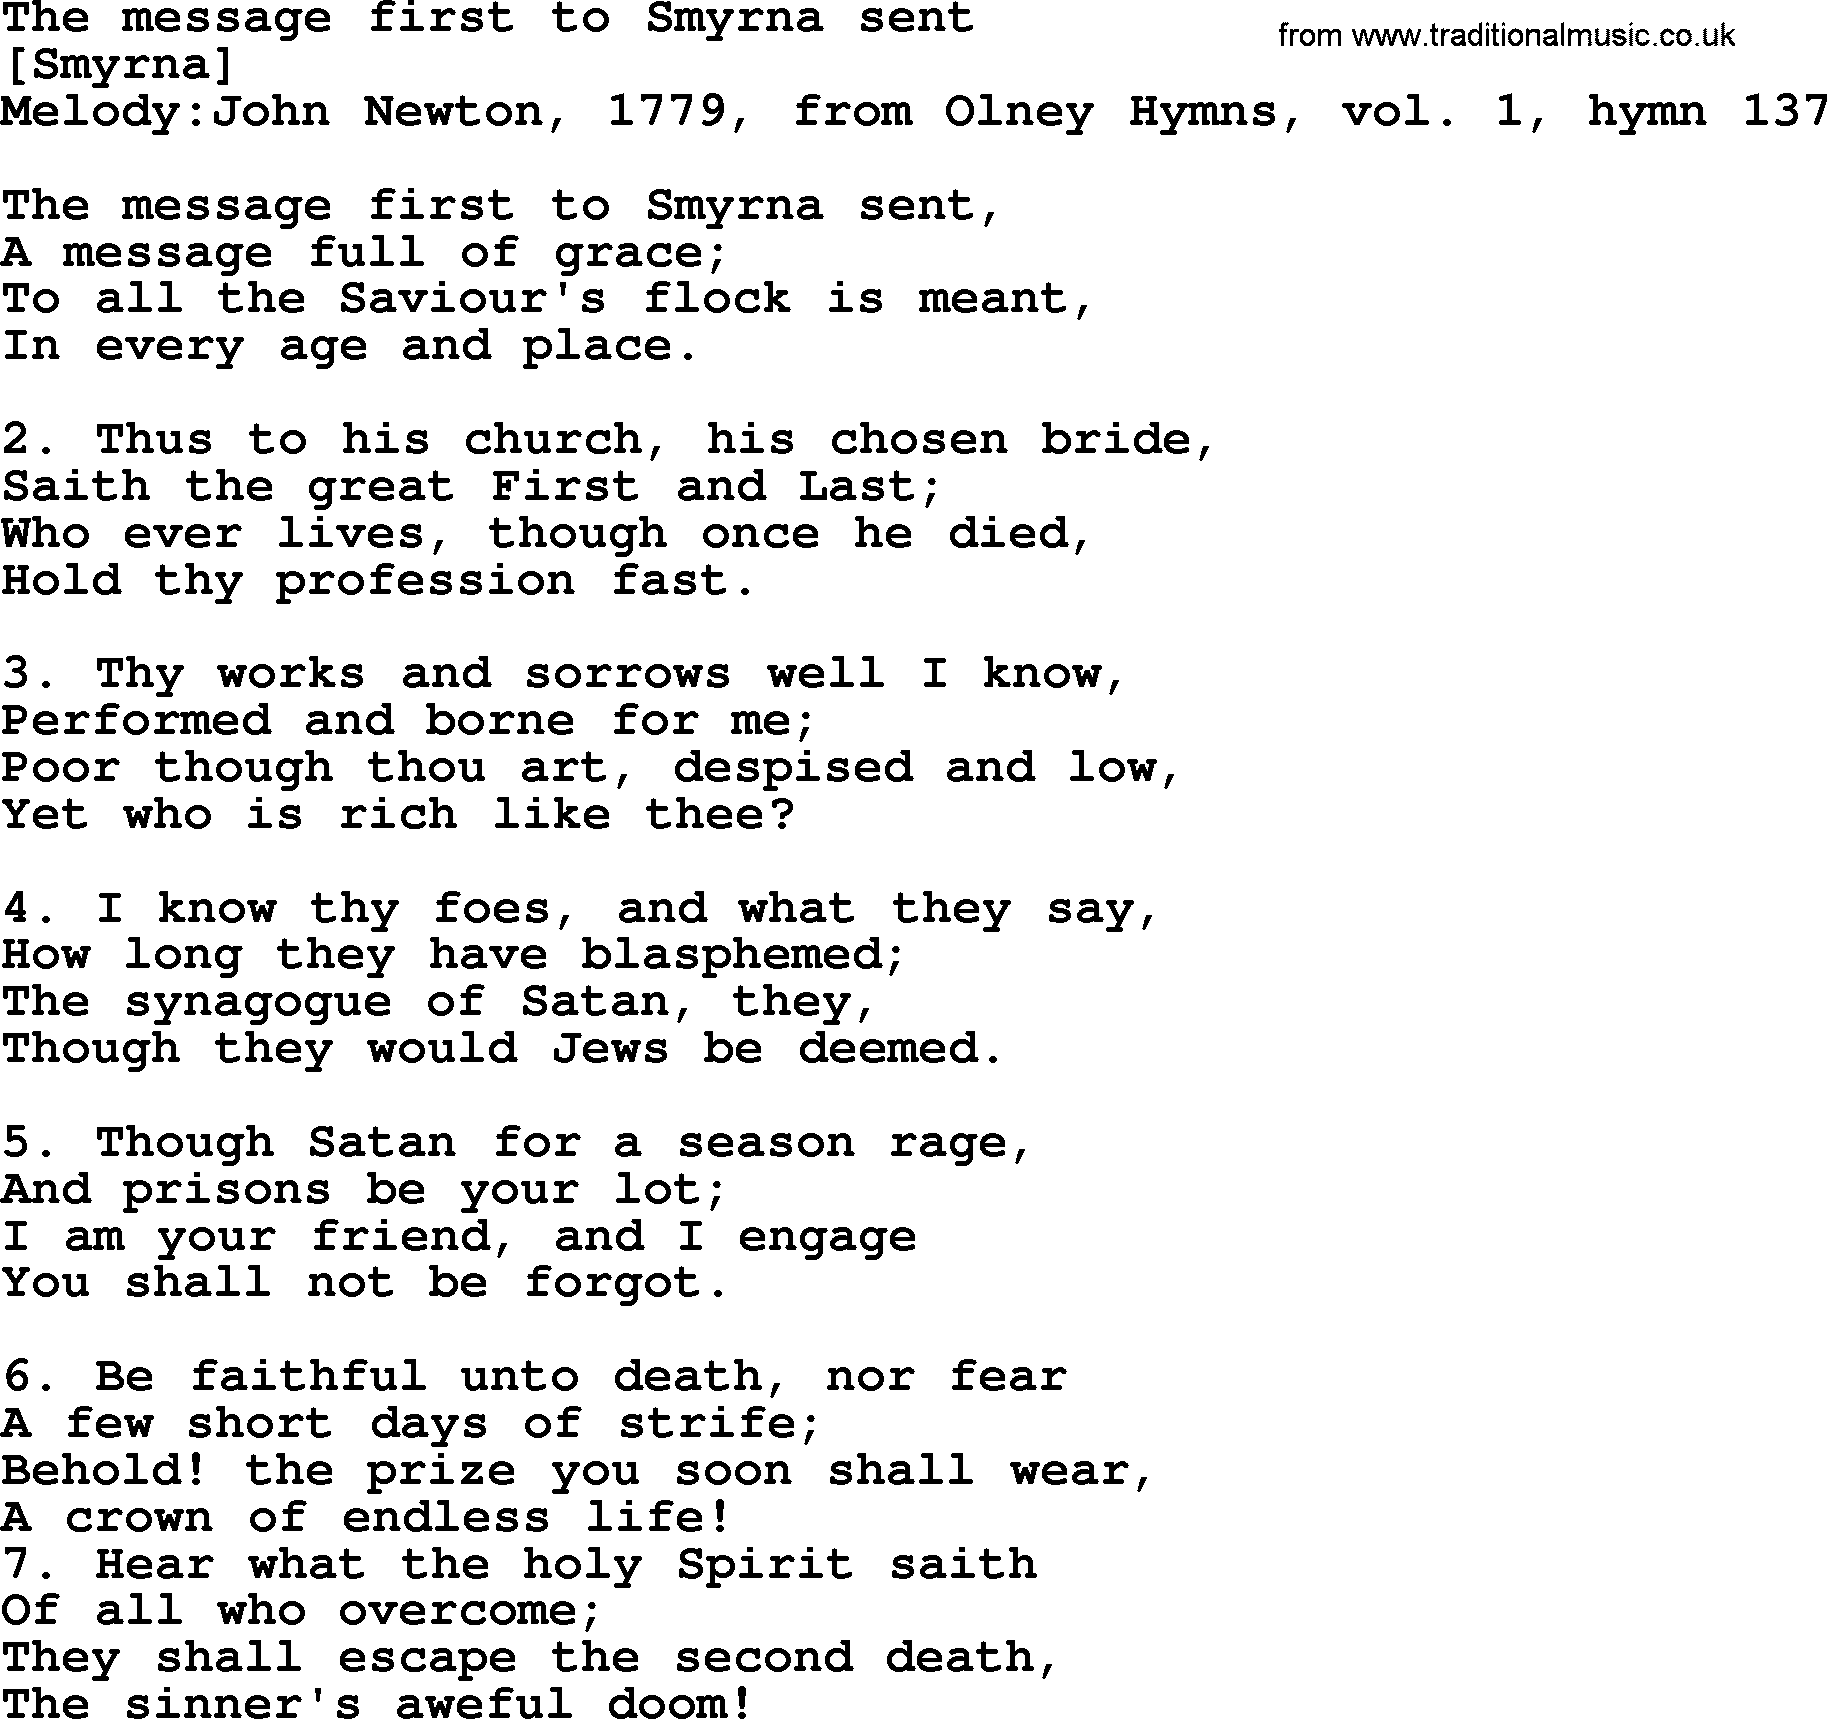 Old English Song: The Message First To Smyrna Sent lyrics